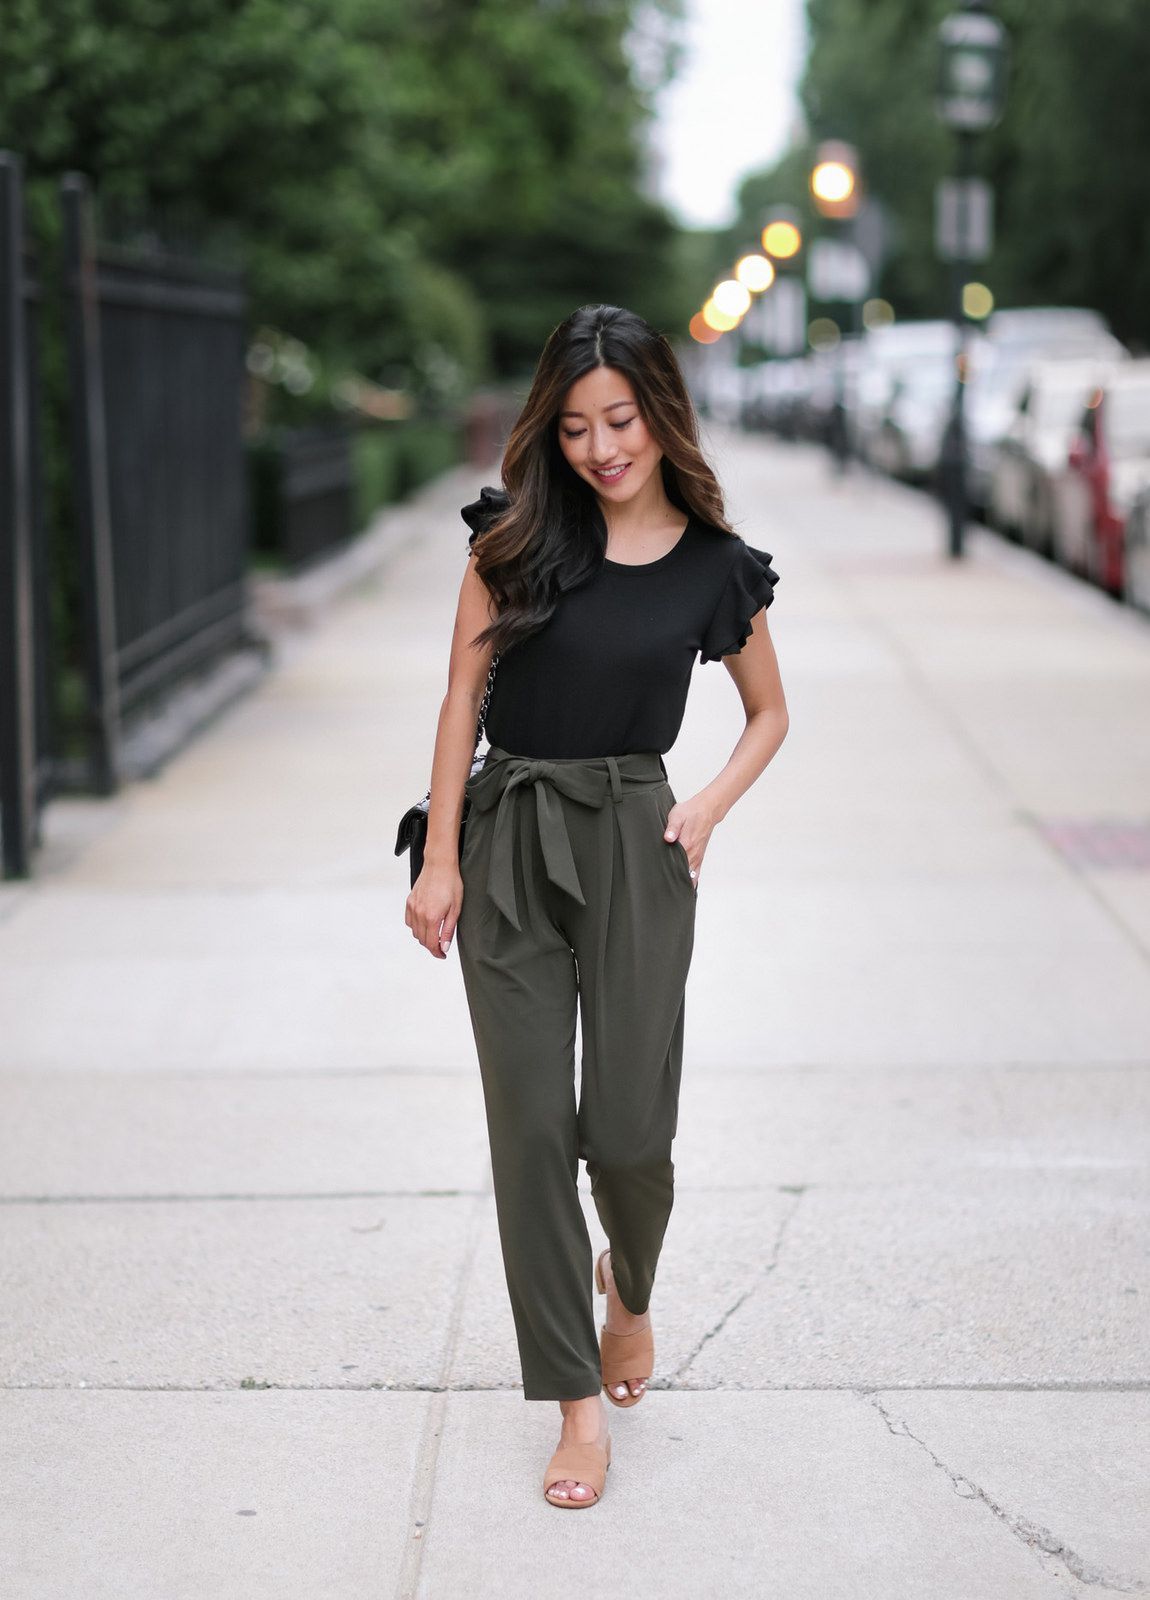 Ankle pants are stylish, trendy and affordable